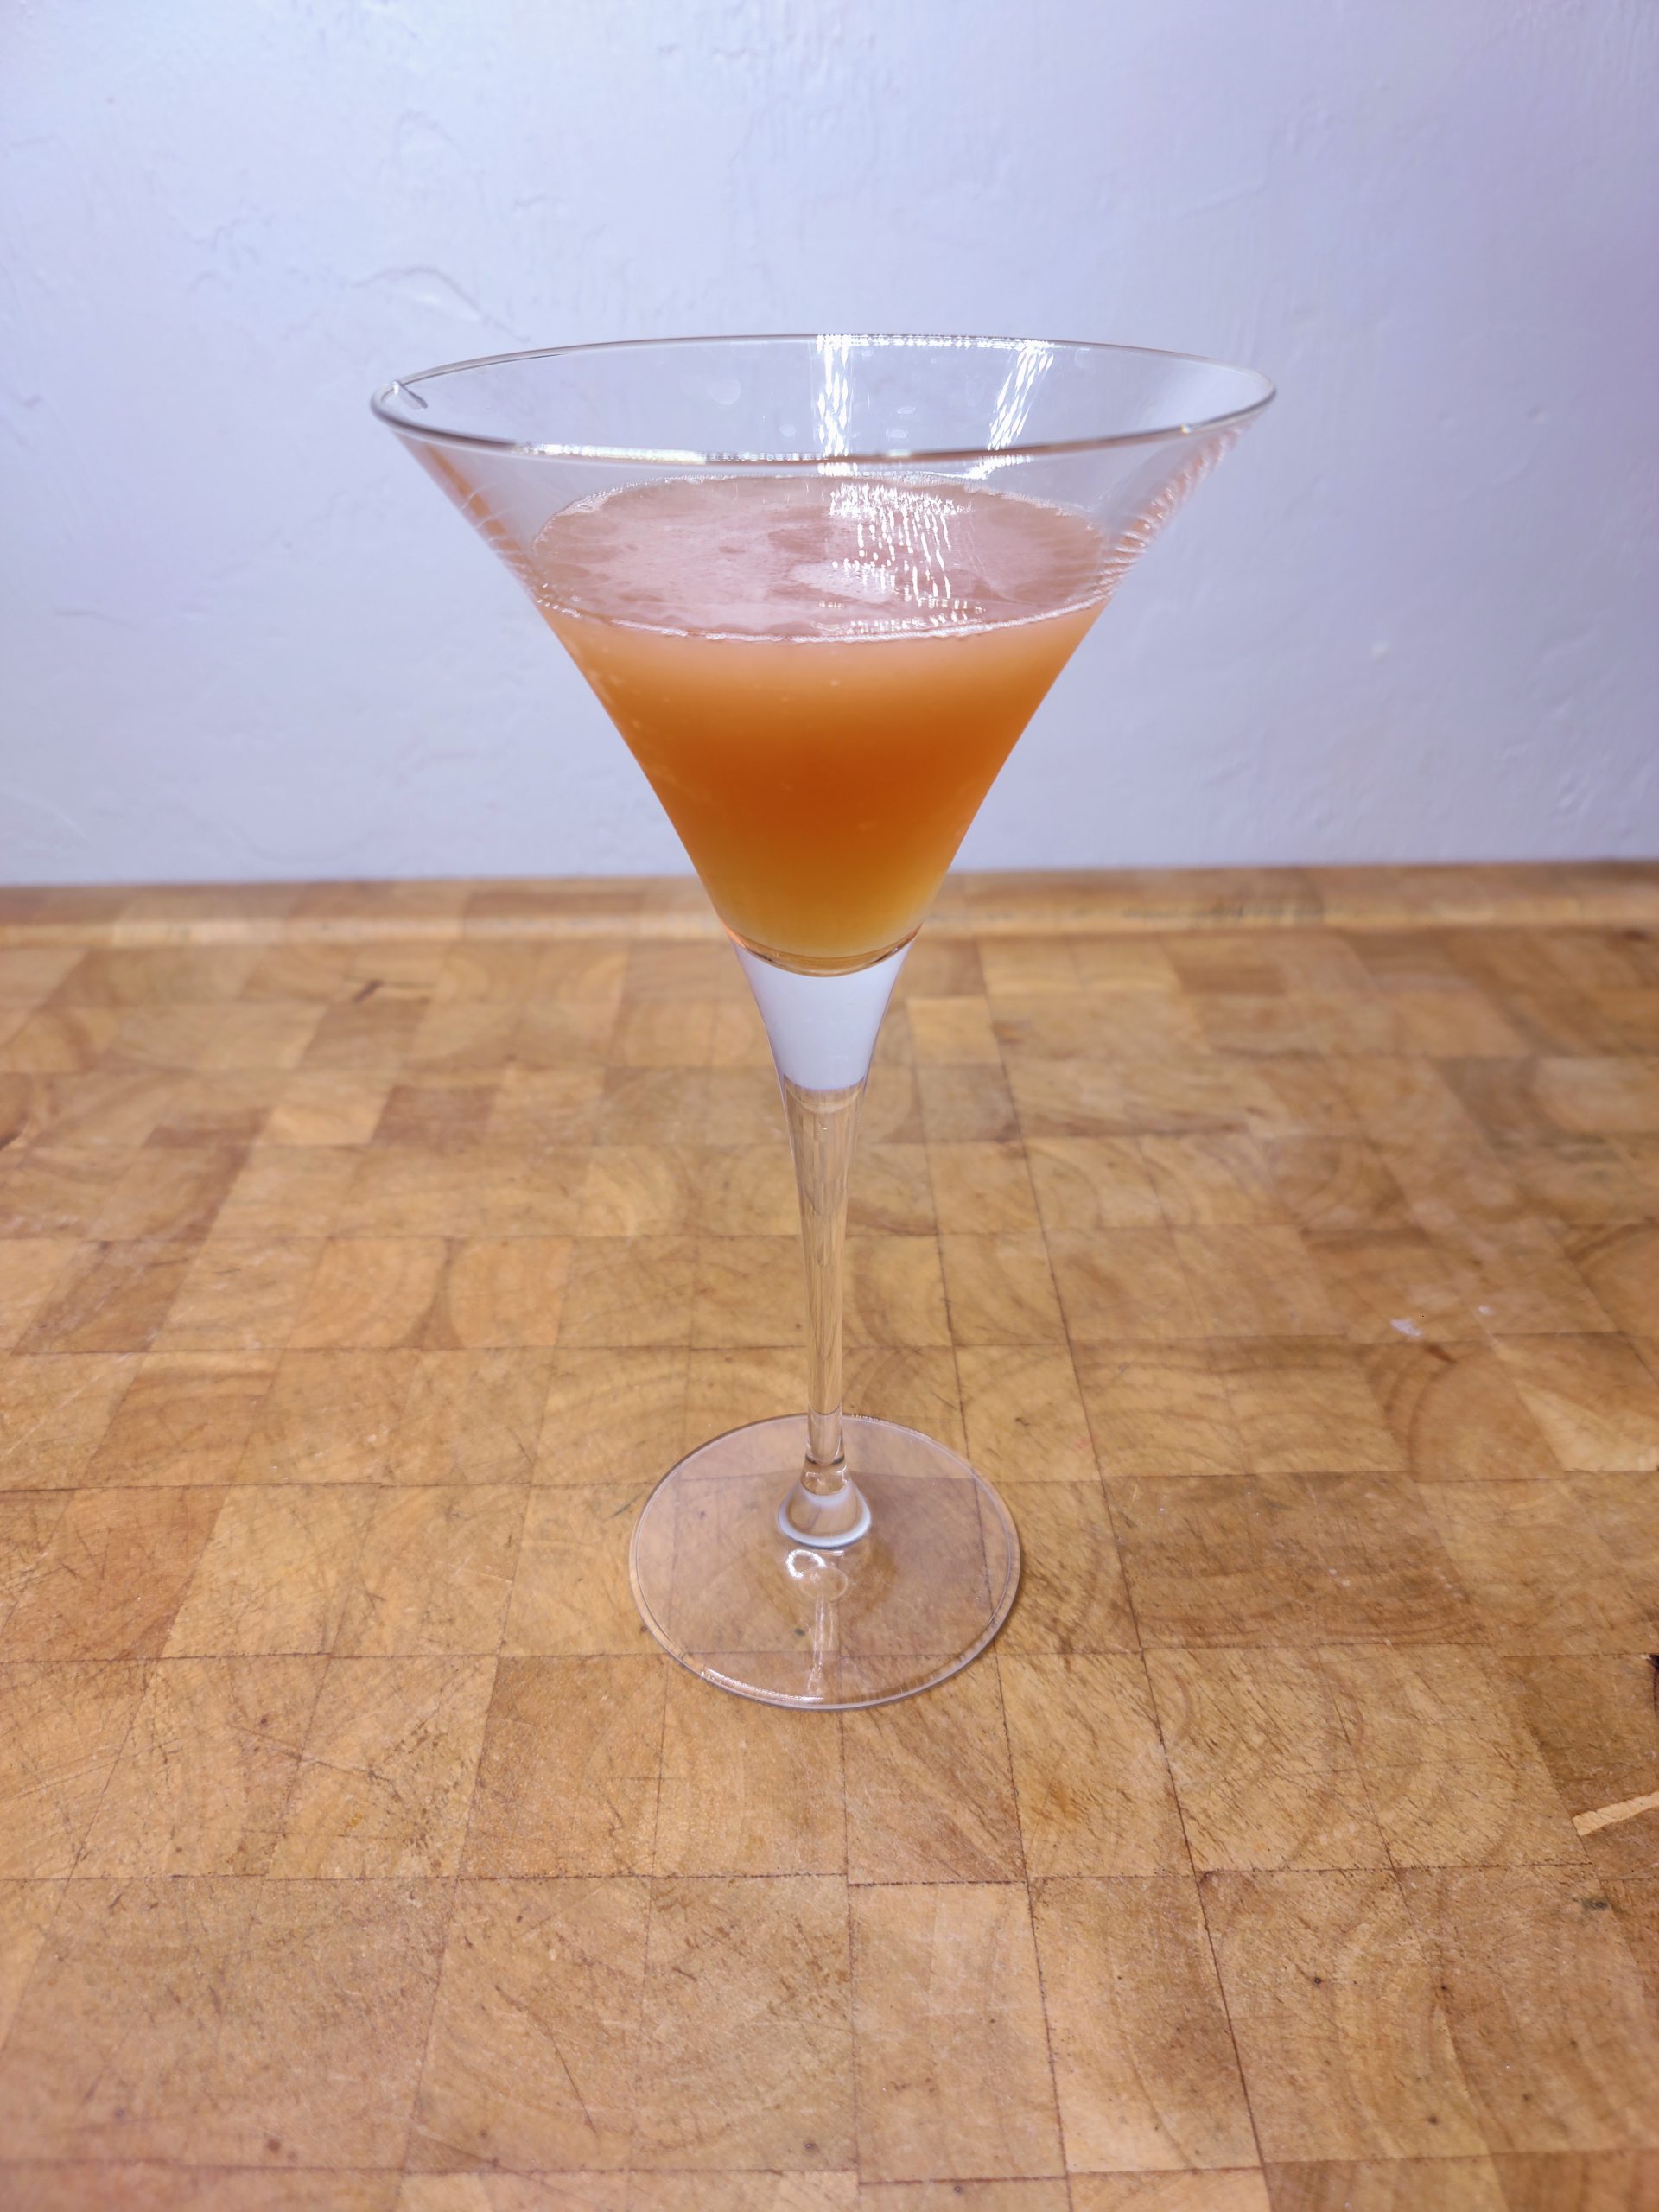 Peanut butter and jelly martini on a wooden table.